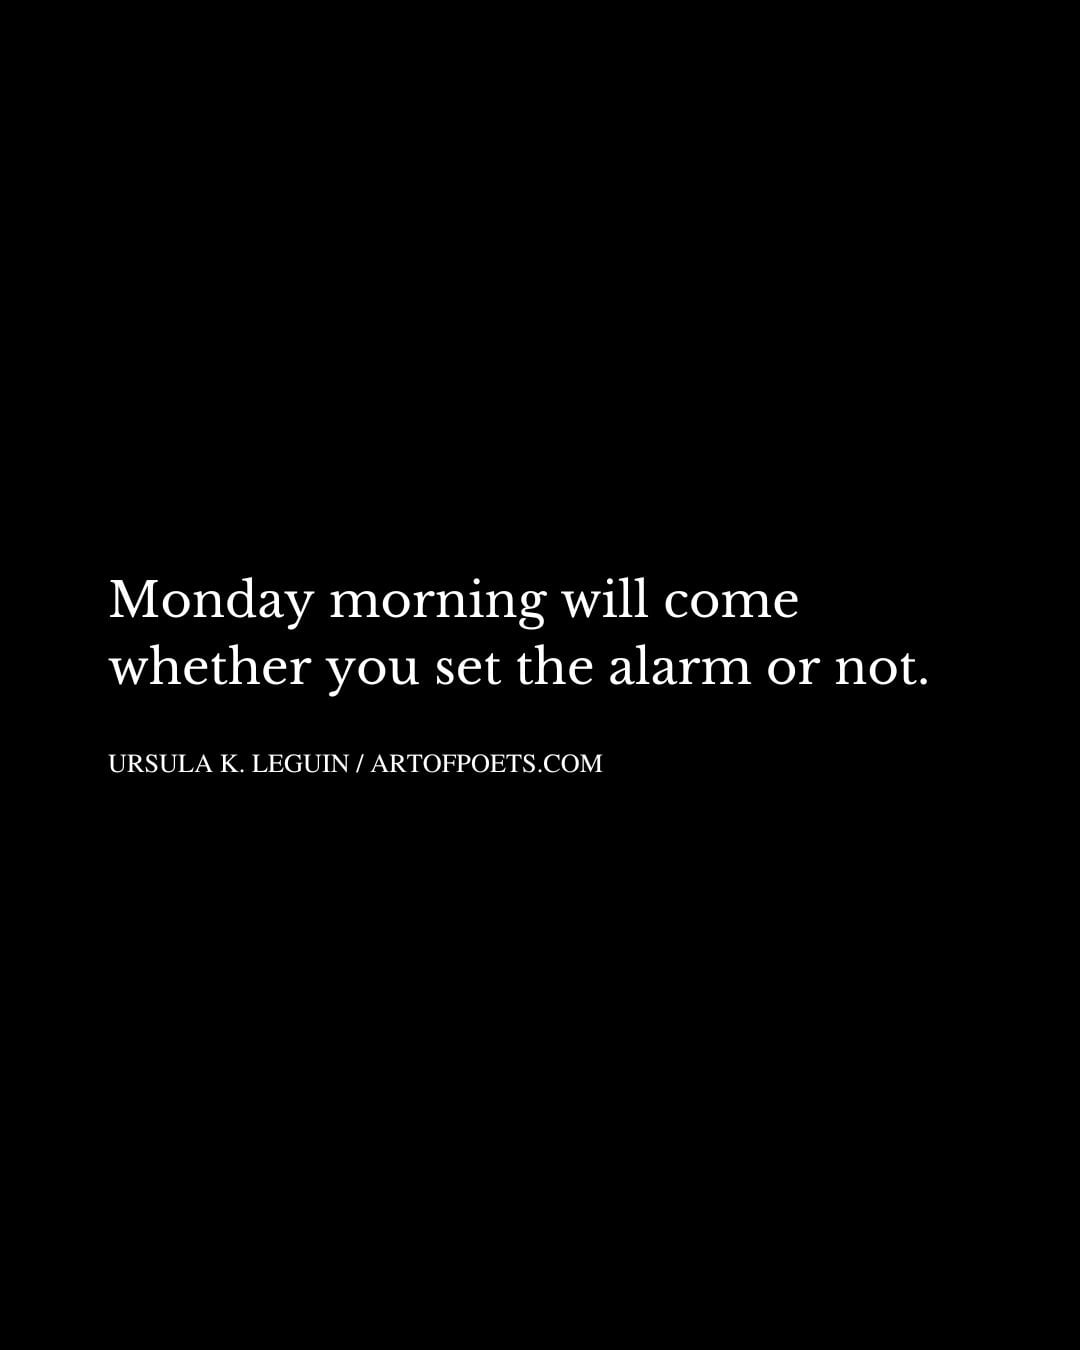 Monday morning will come whether you set the alarm or not